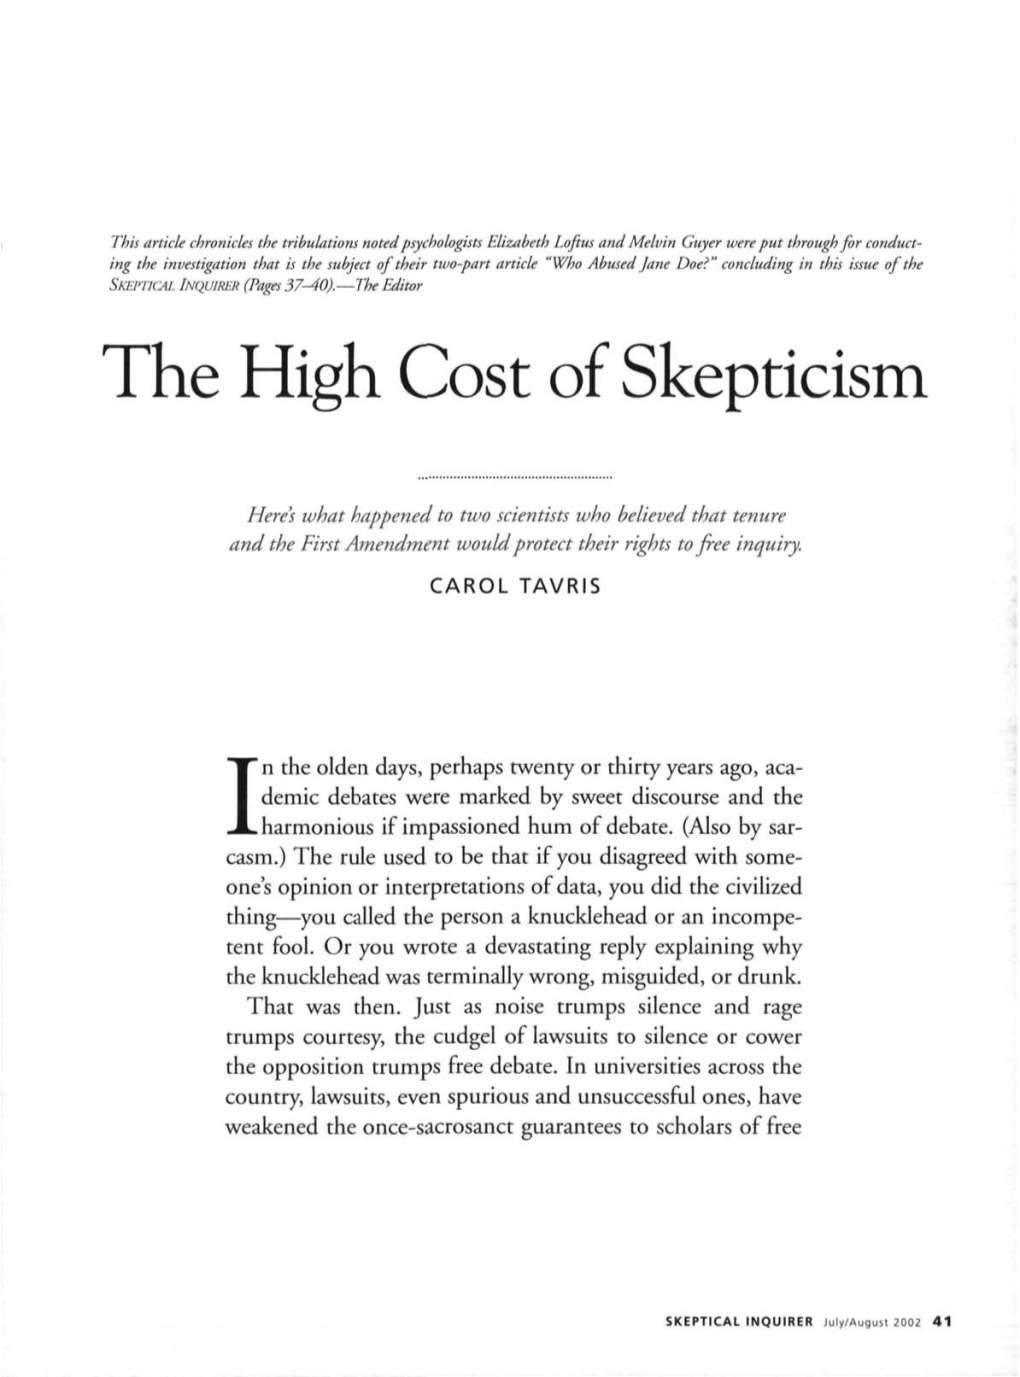 The High Cost of Skepticism